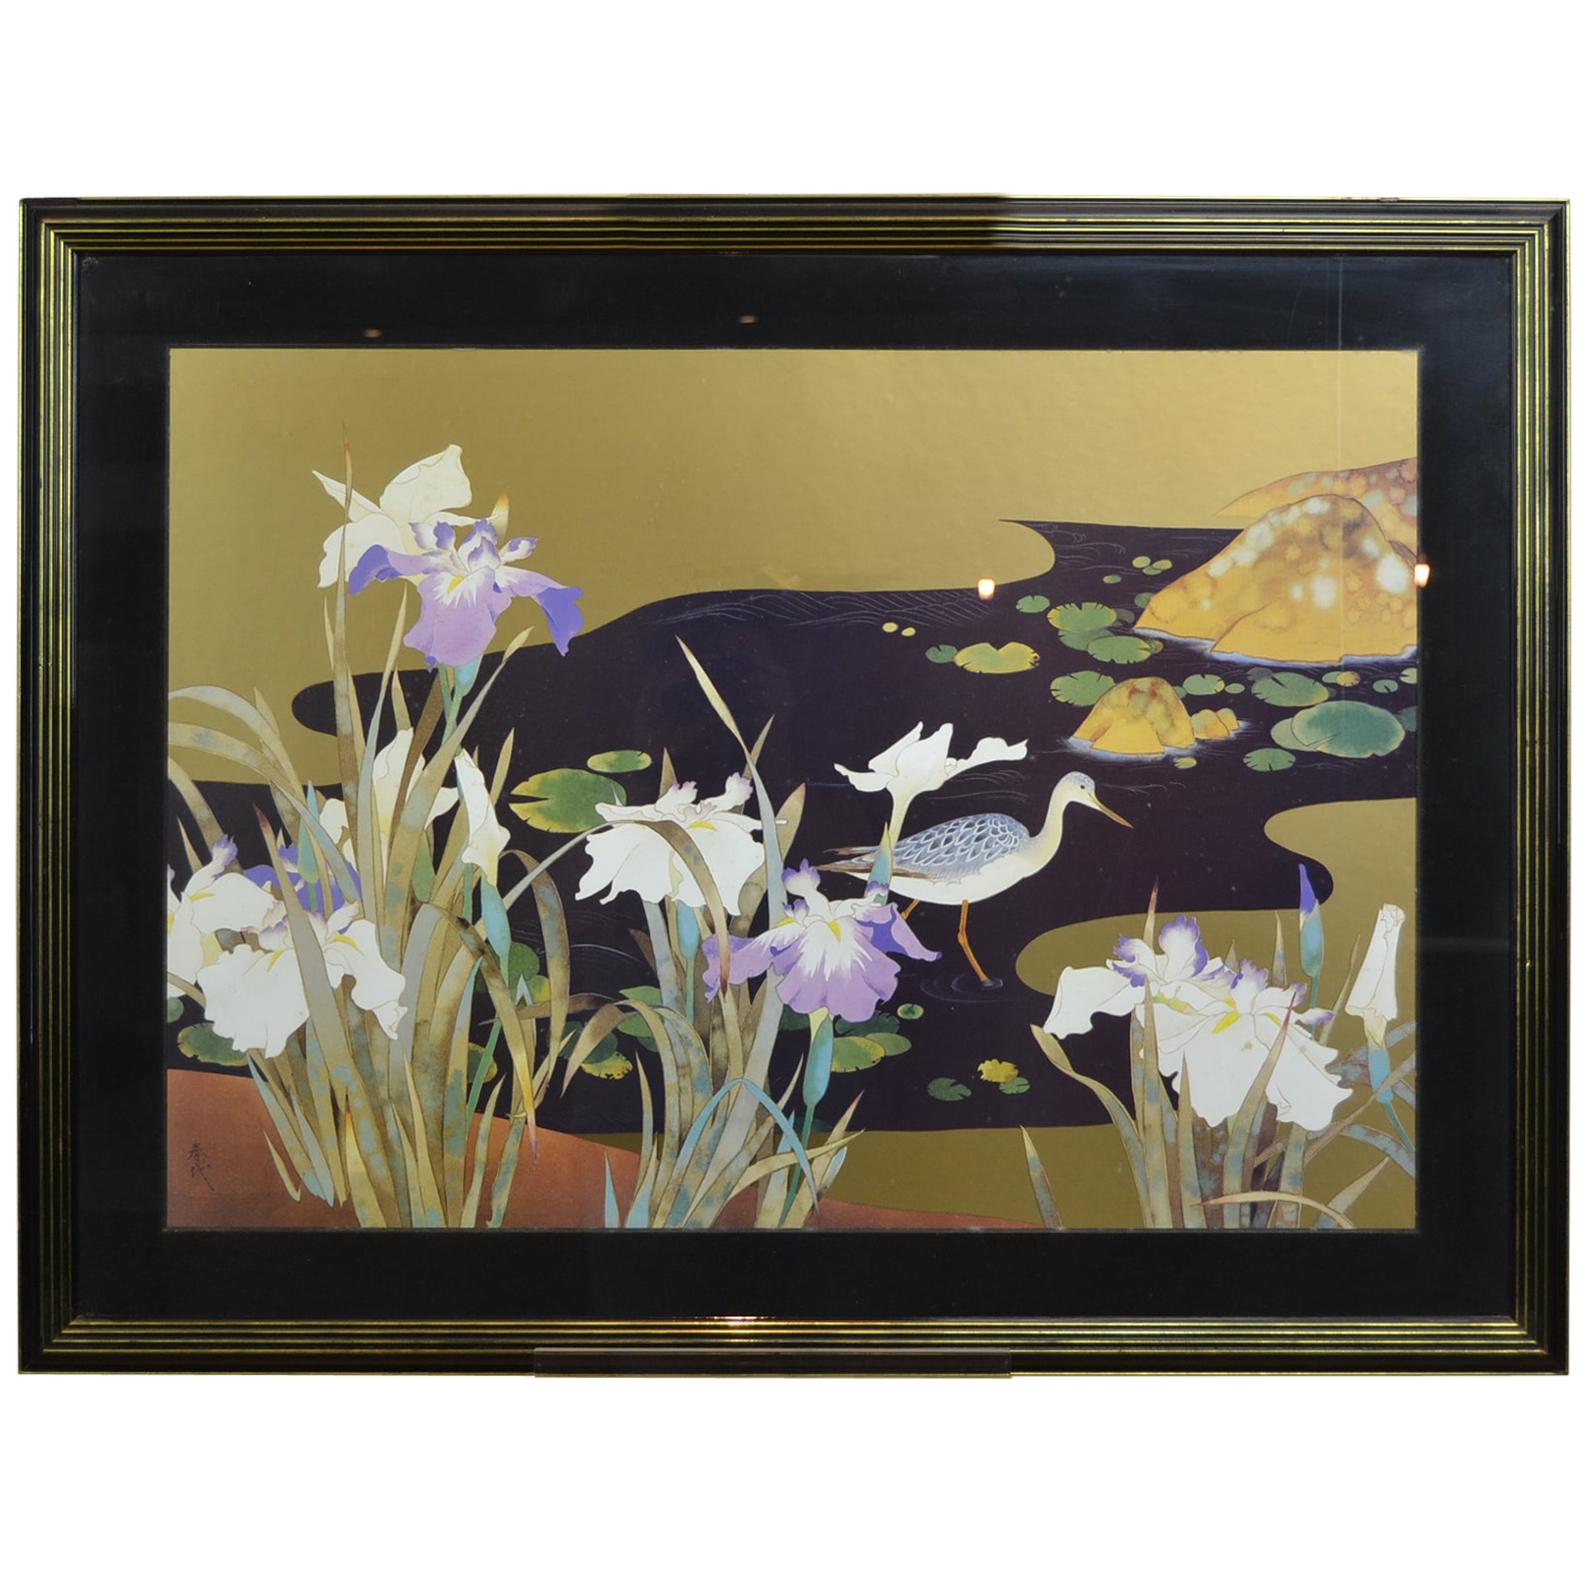 Vintage Framed Art Print with Bird, Cane and Flowers